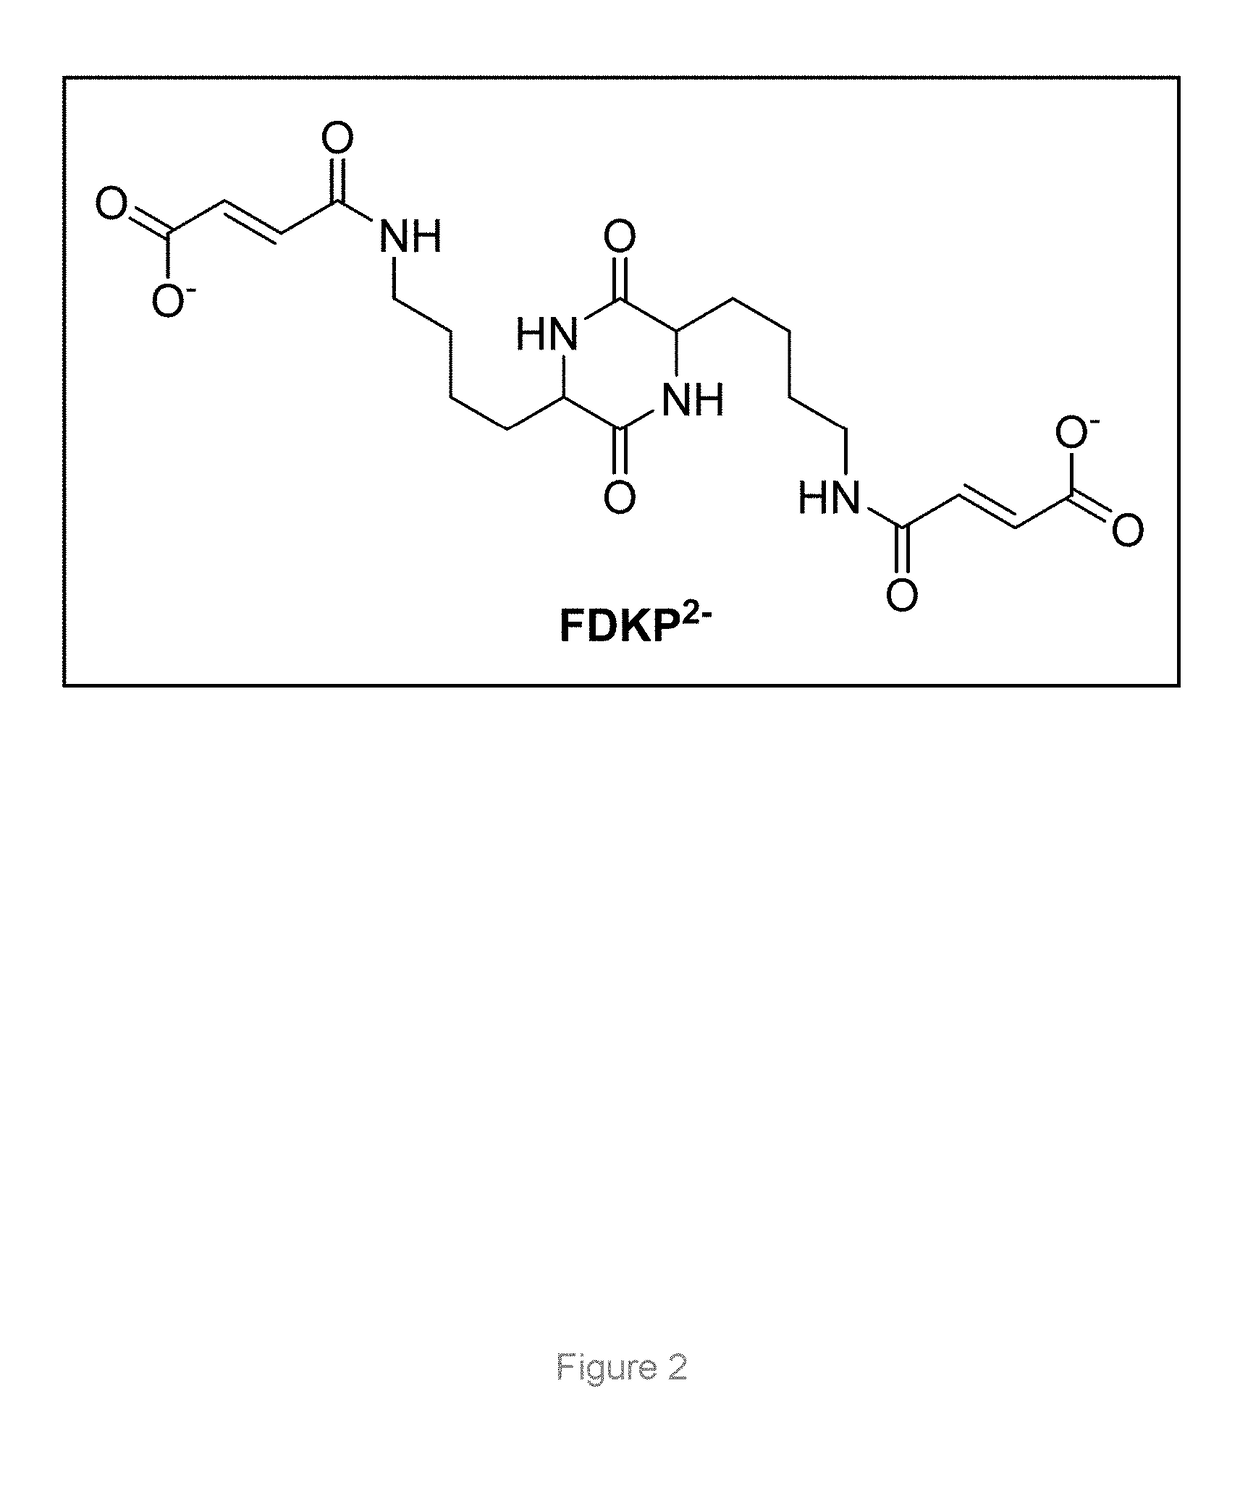 Nicotine—diketopiperazine microparticle formulations and methods of making the same